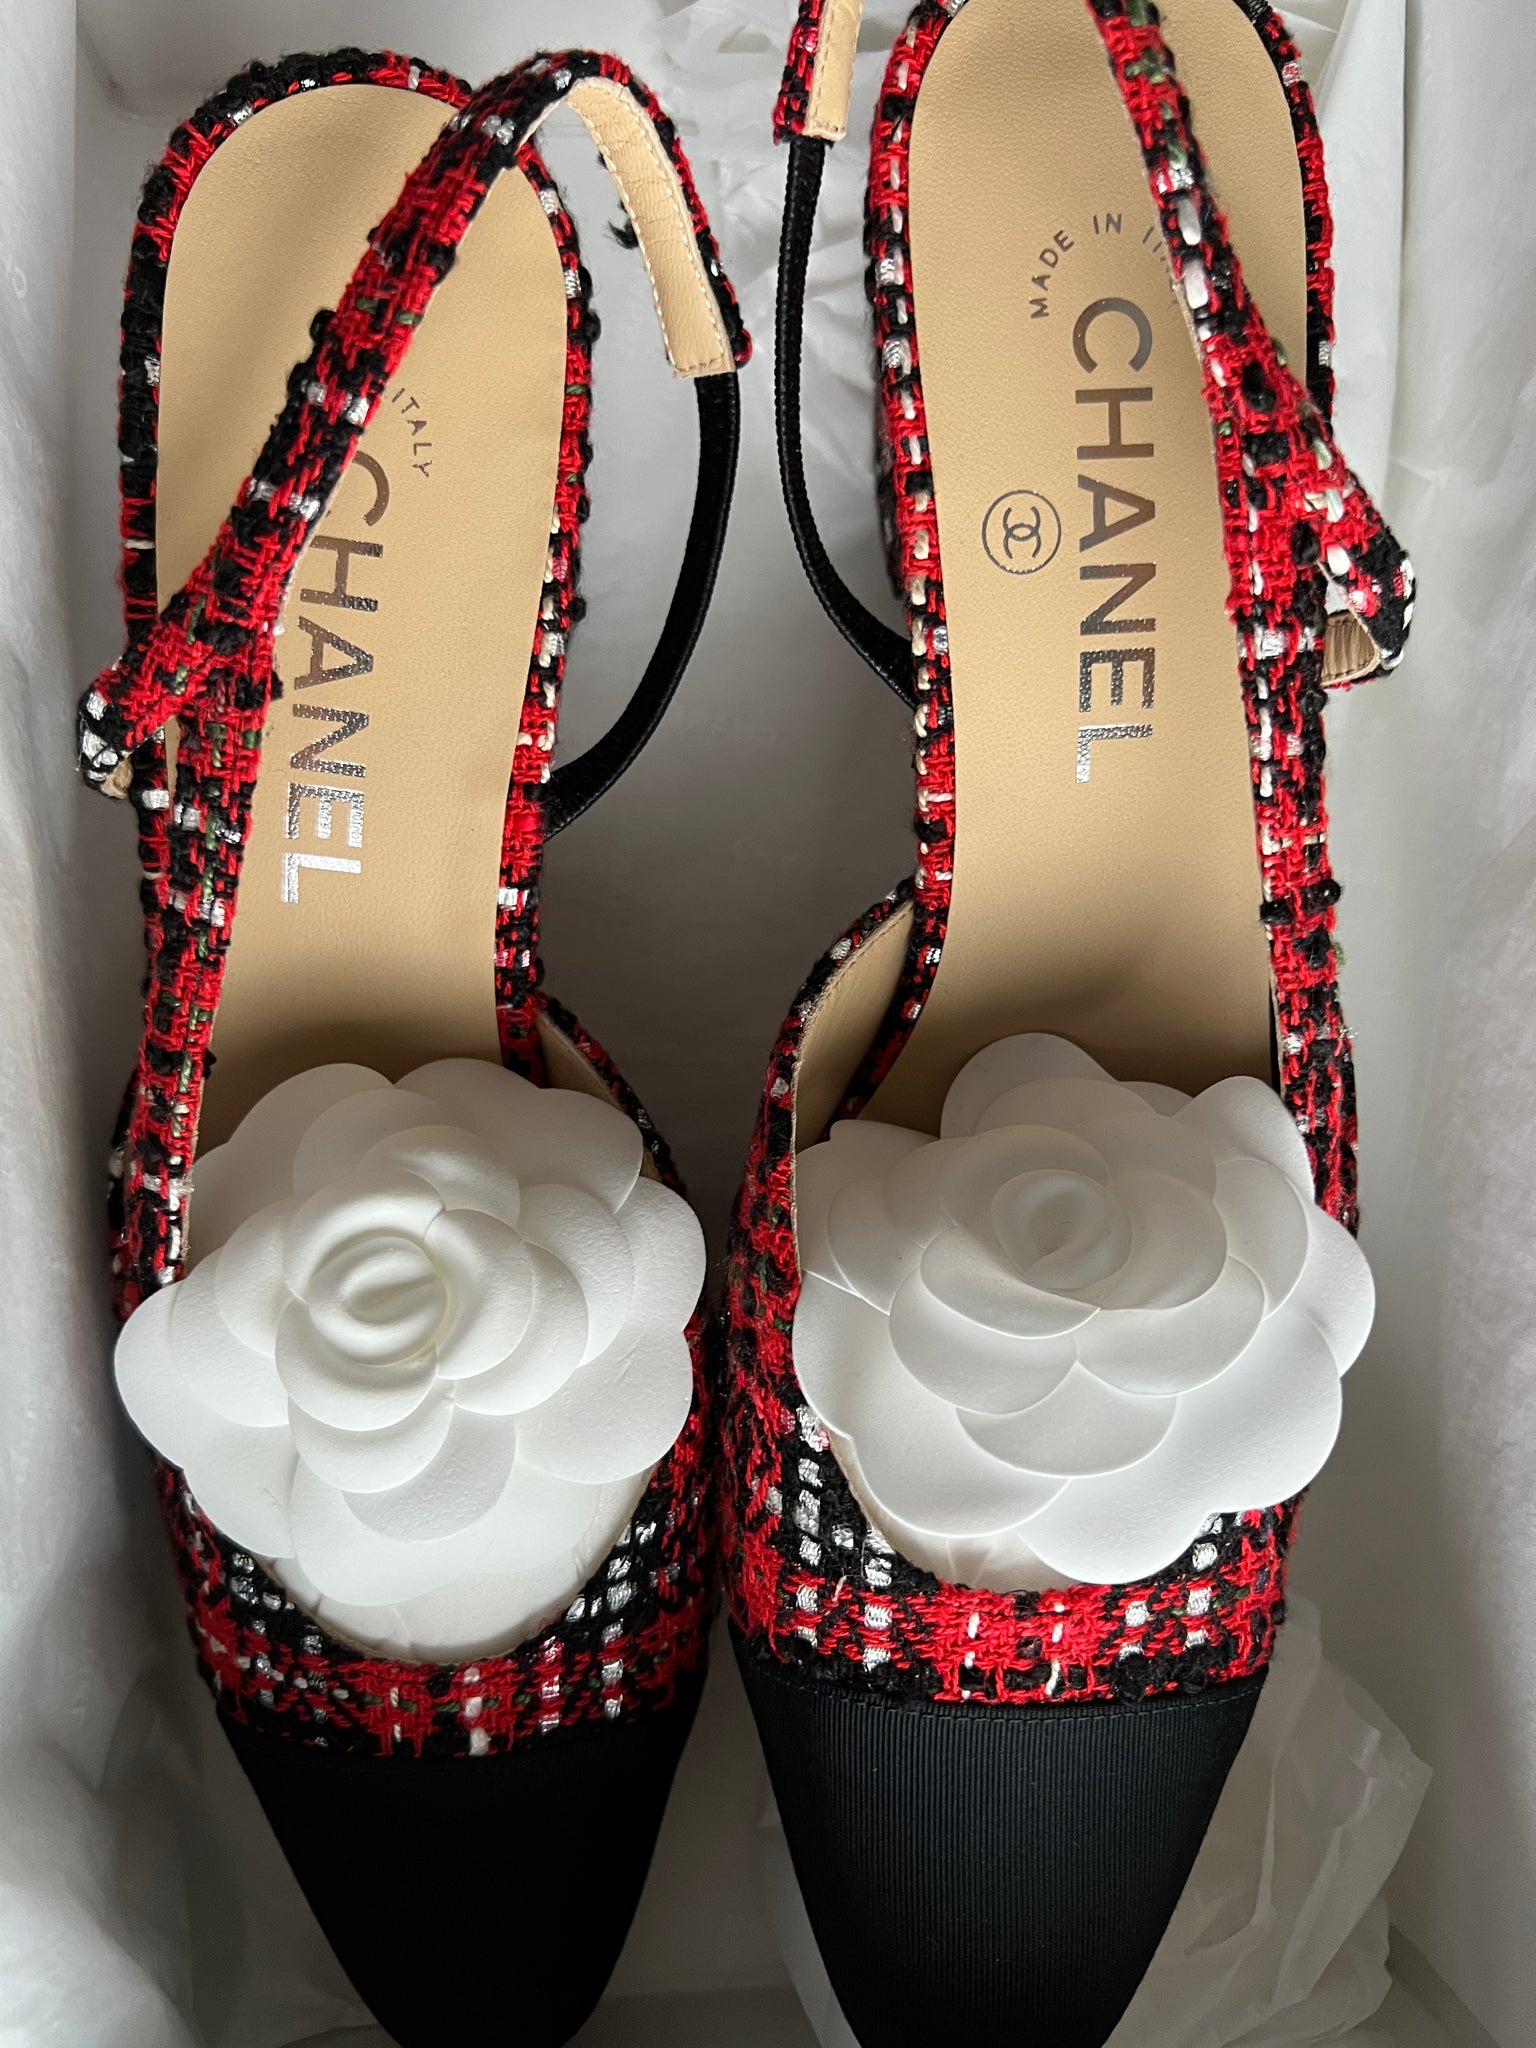 Chanel Tweed Slingbacks in Size 40 - Lou's Closet